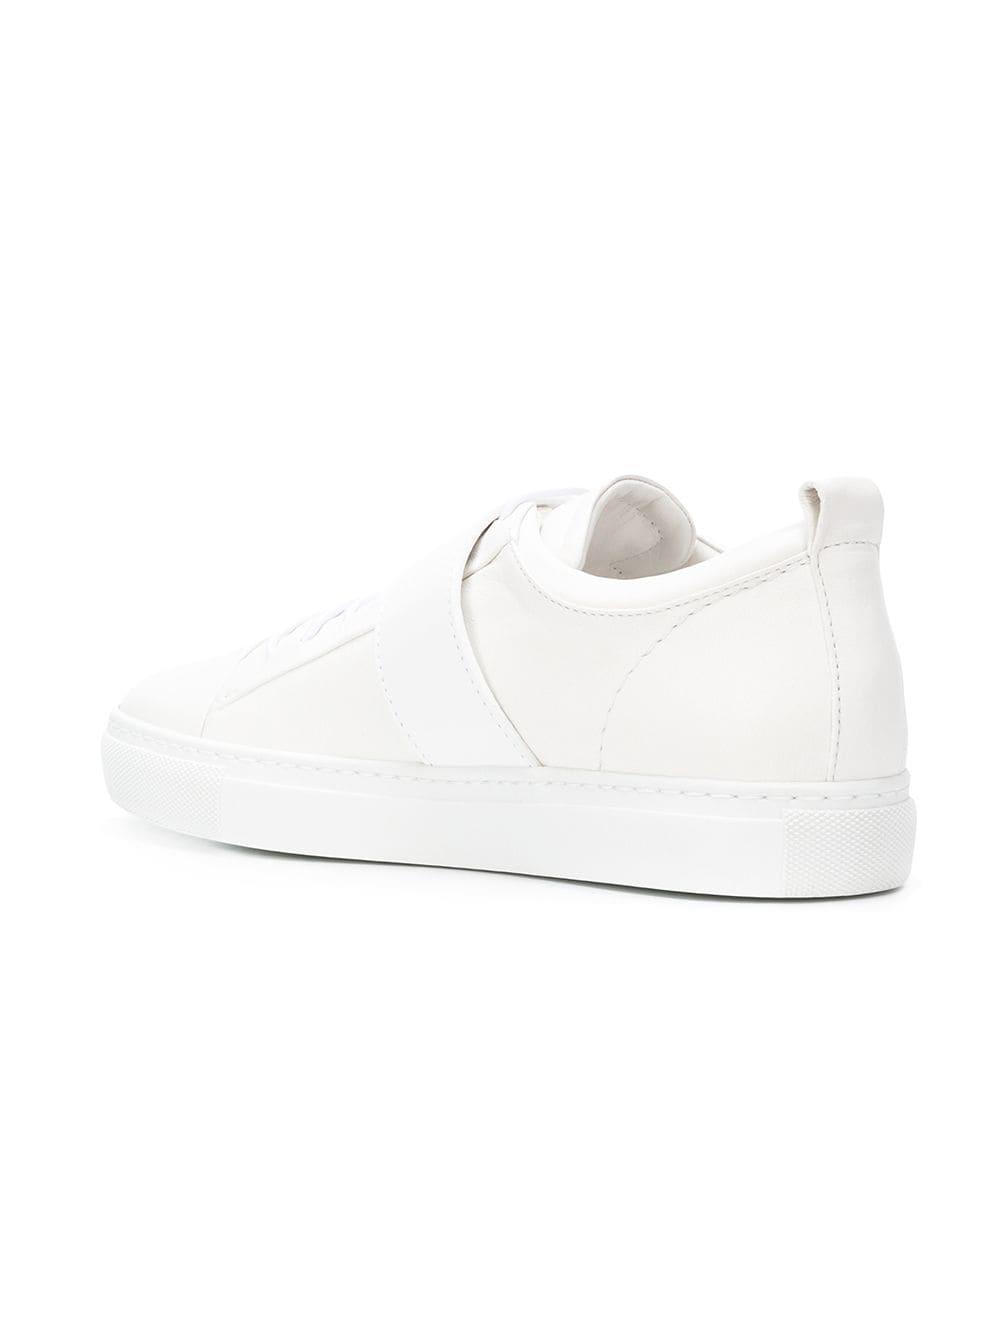 Lanvin Leather Buckle Sneakers in White - Lyst